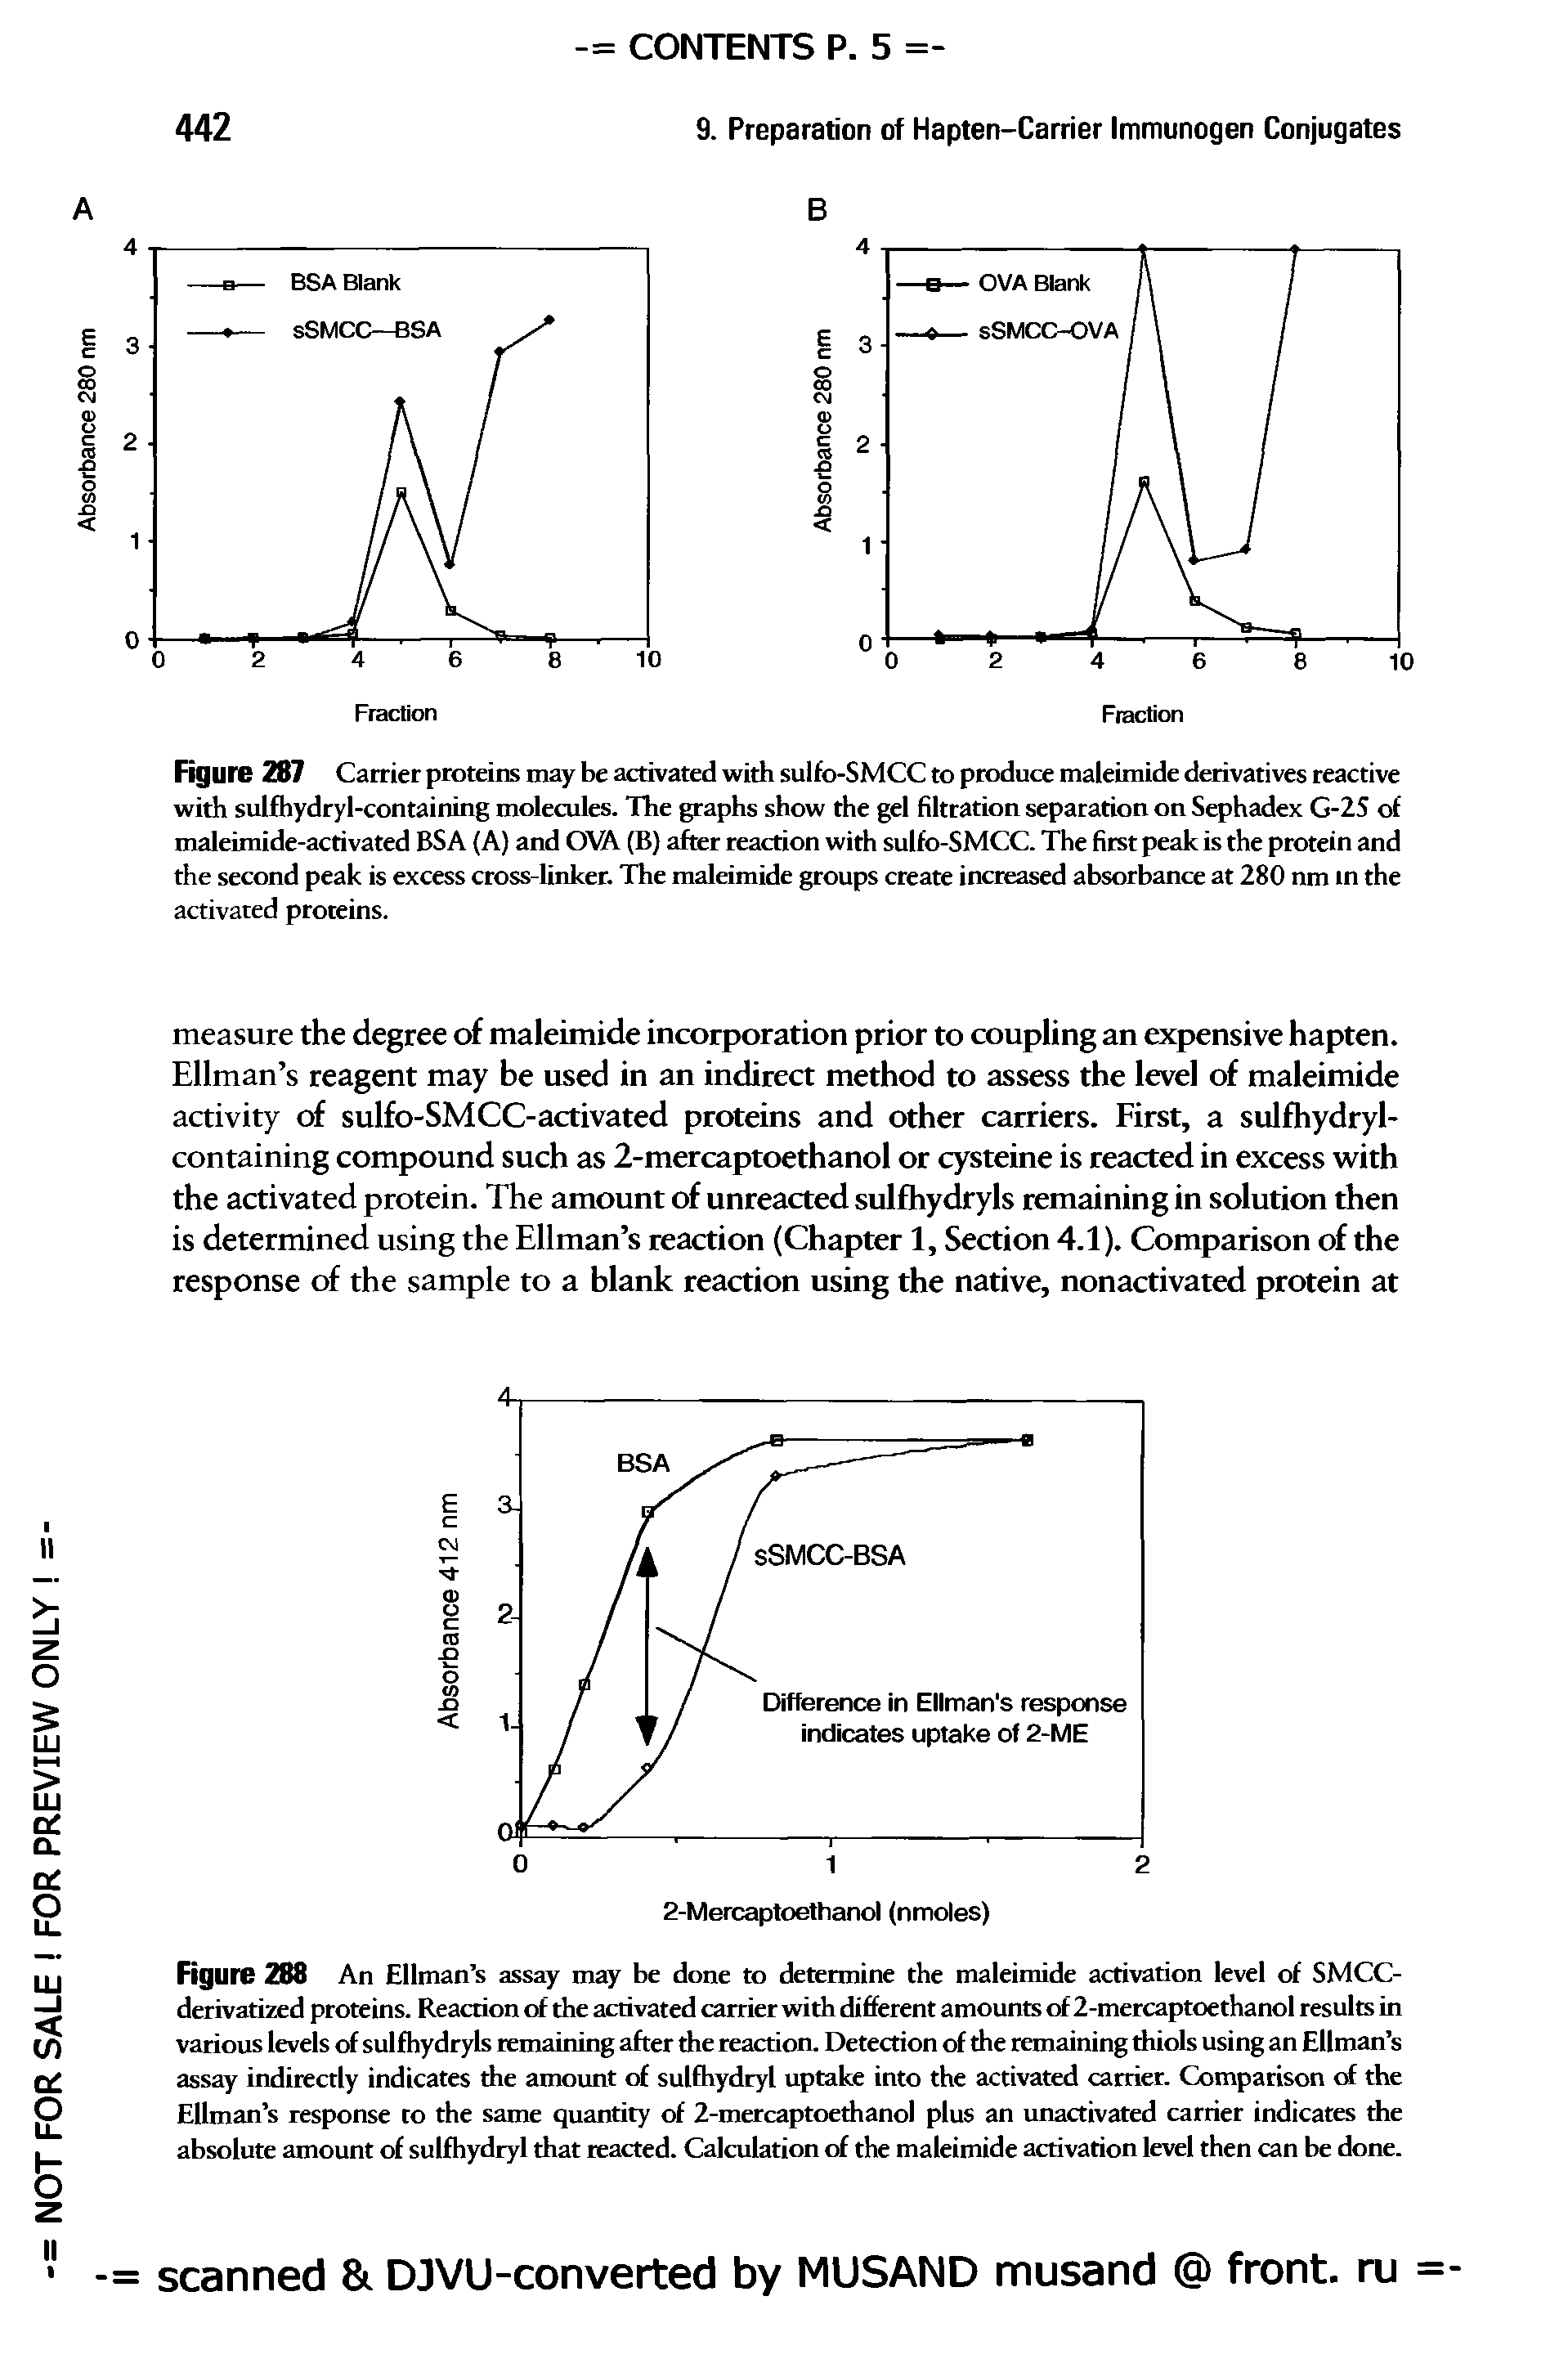 Figure 287 Carrier proteins may be activated with sulfo-SMCC to produce maleimide derivatives reactive with sulfhydryl-containing molecules. The graphs show the gel filtration separation on Sephadex G-2S of maleimide-activated BSA (A) and OVA (B) after reaction with sulfo-SMCC. The first peak is the protein and the second peak is excess cross-linker. The maleimide groups create increased absorbance at 280 nm in the activated proteins.